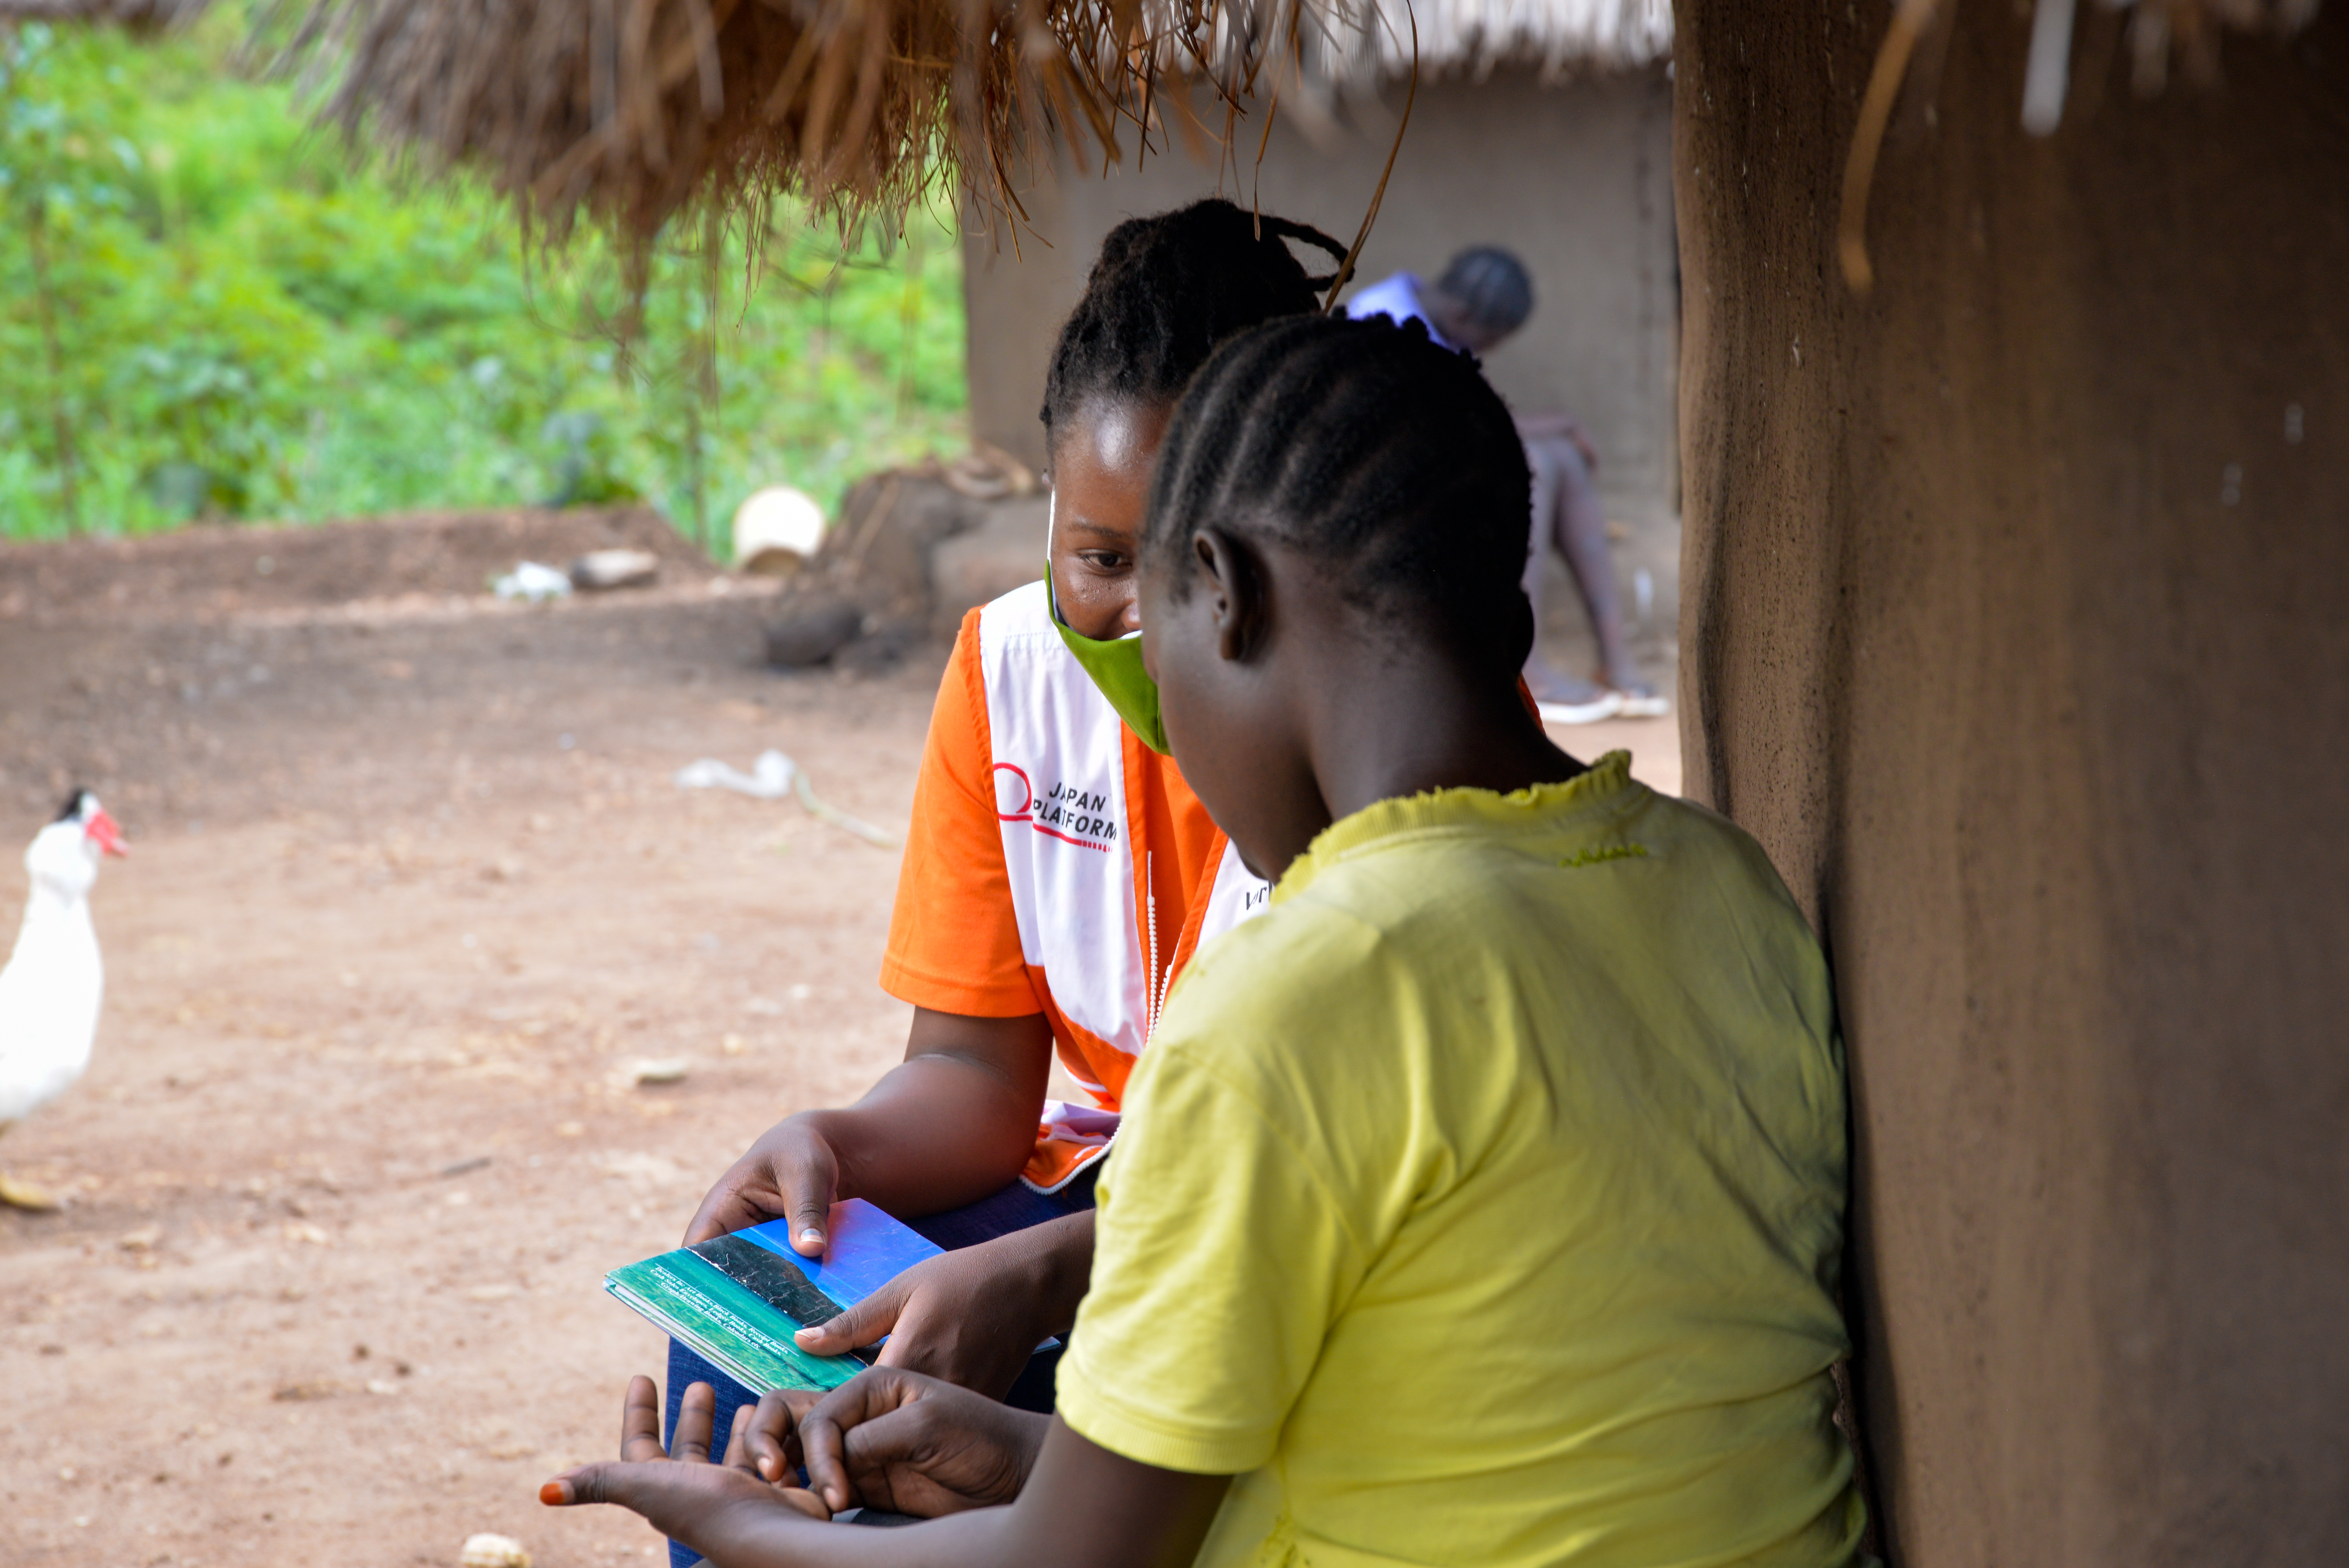 Lucy speaking to one of the World Vision case workers